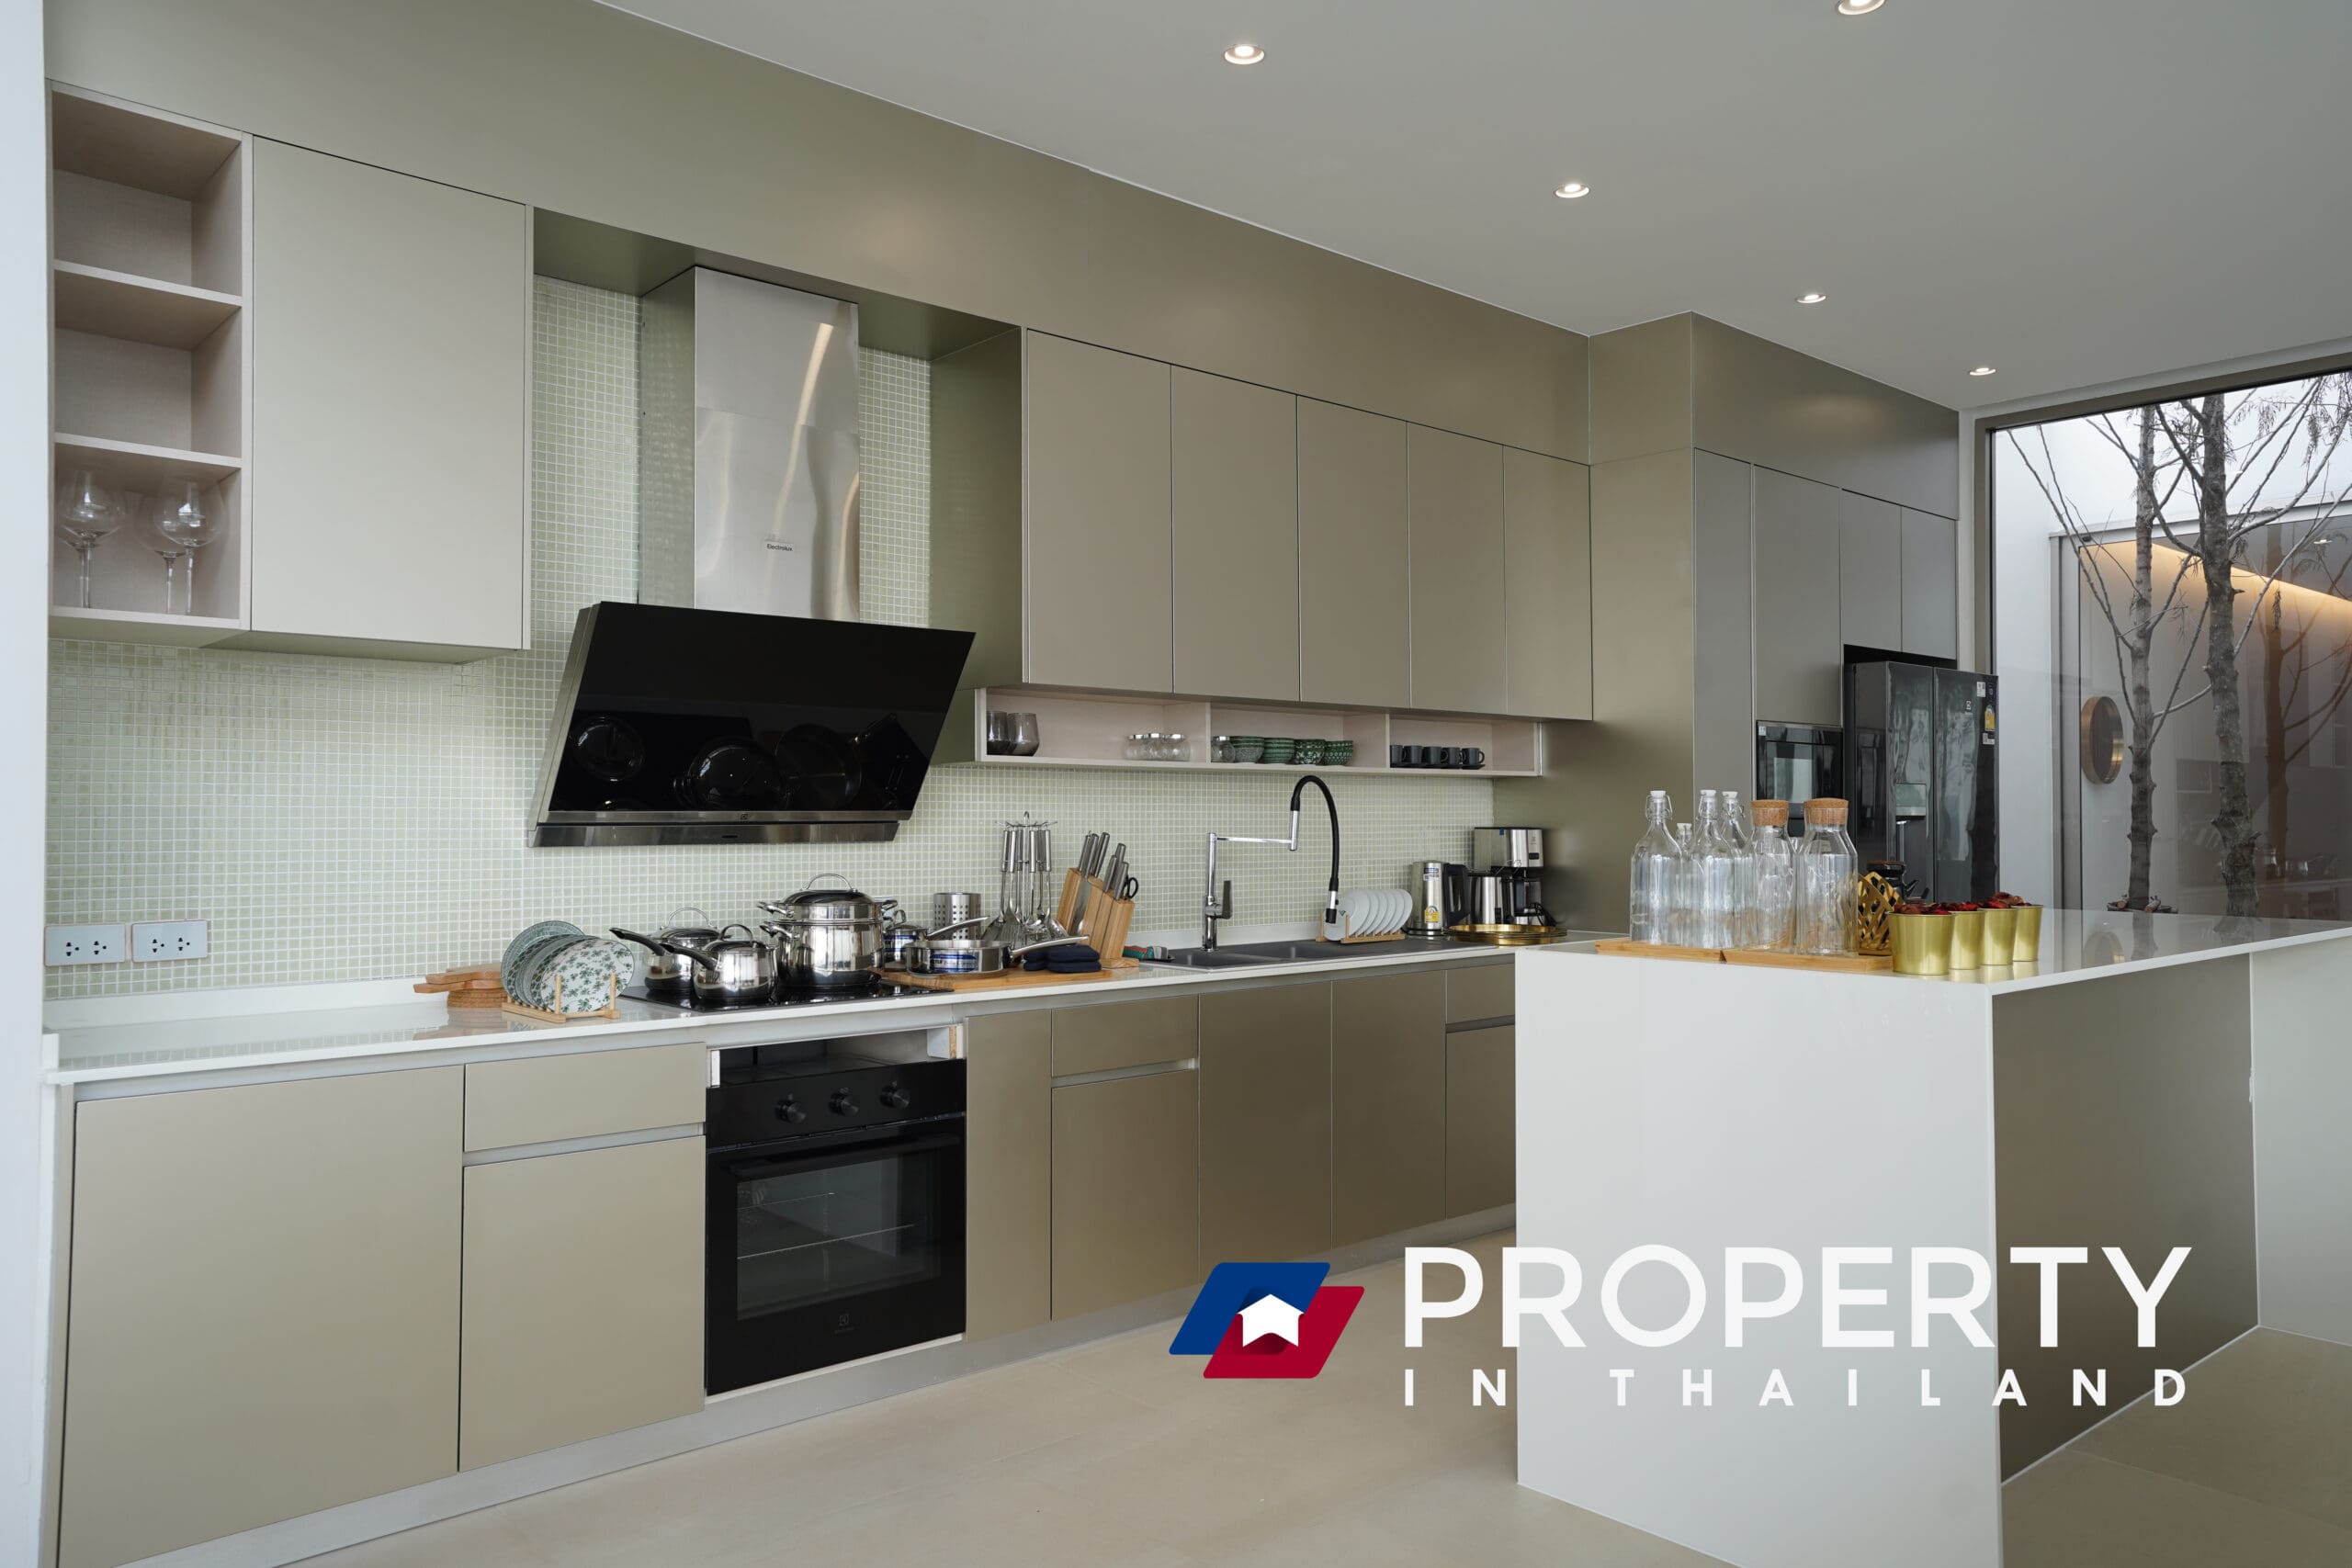 Real Estate listing In thailand,Phuket for sale (Kitchen)